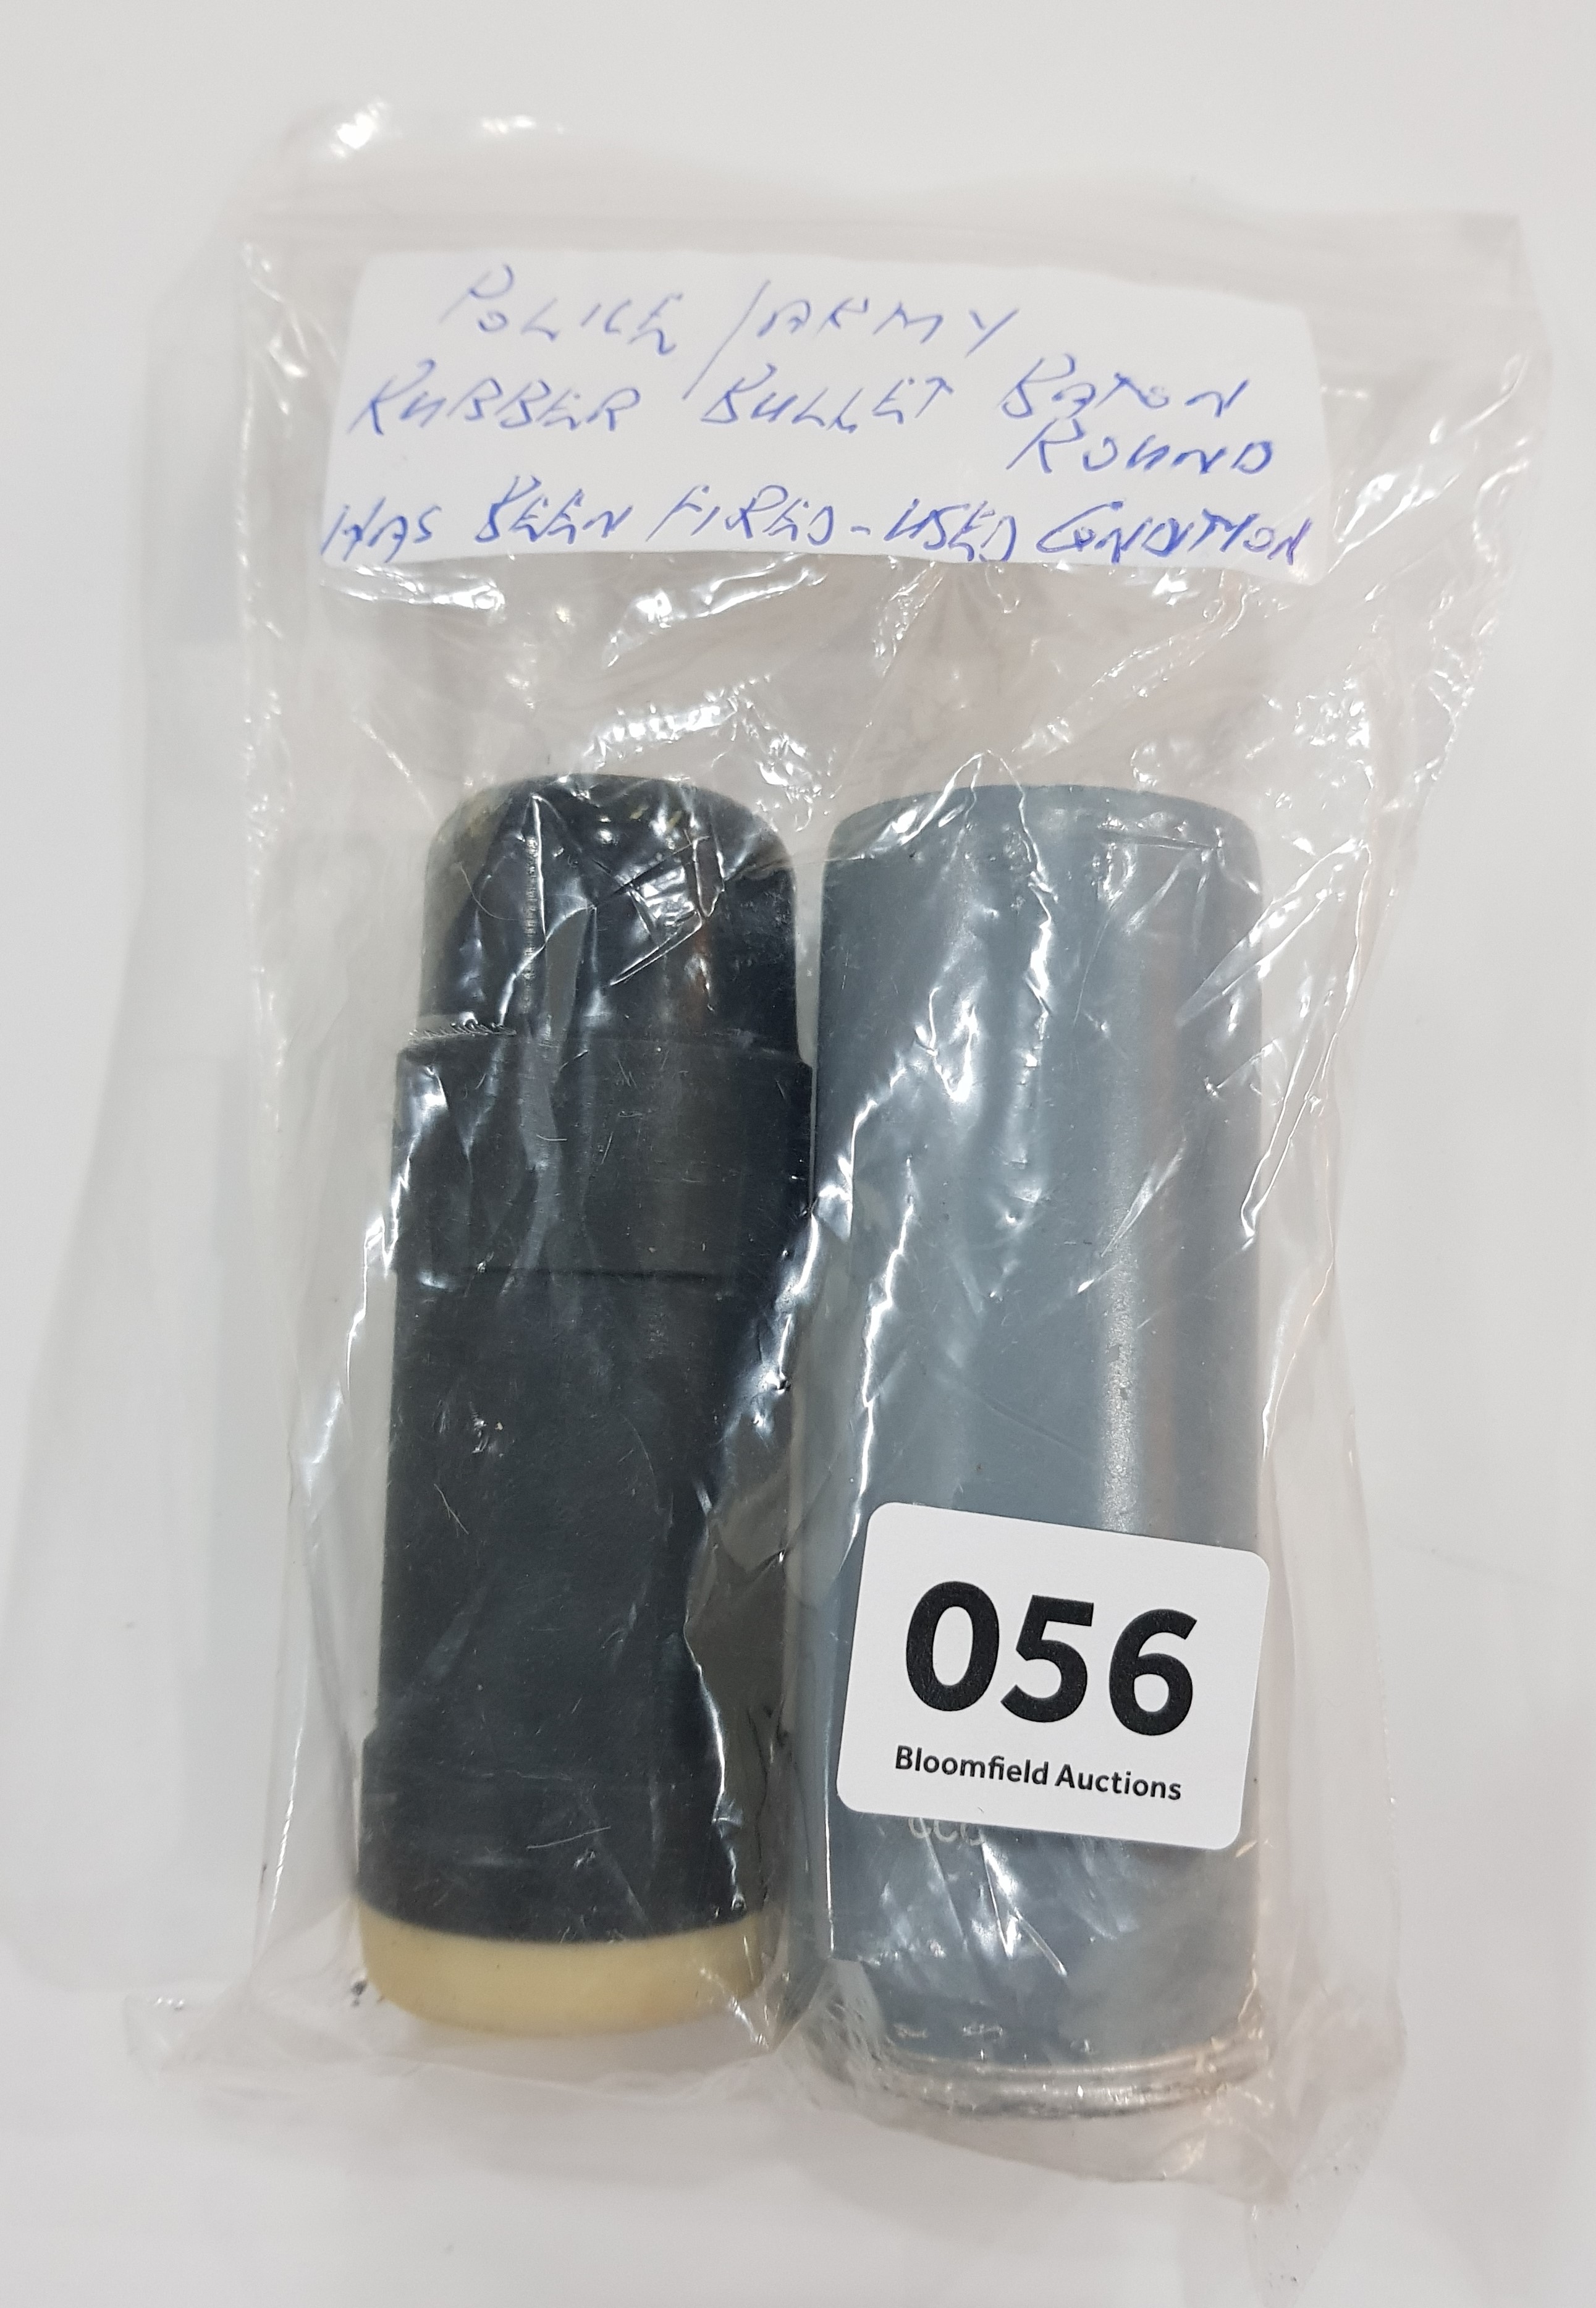 POLICE/ARMY RUBBER BULLET BATON ROUND - HAVE BEEN USED